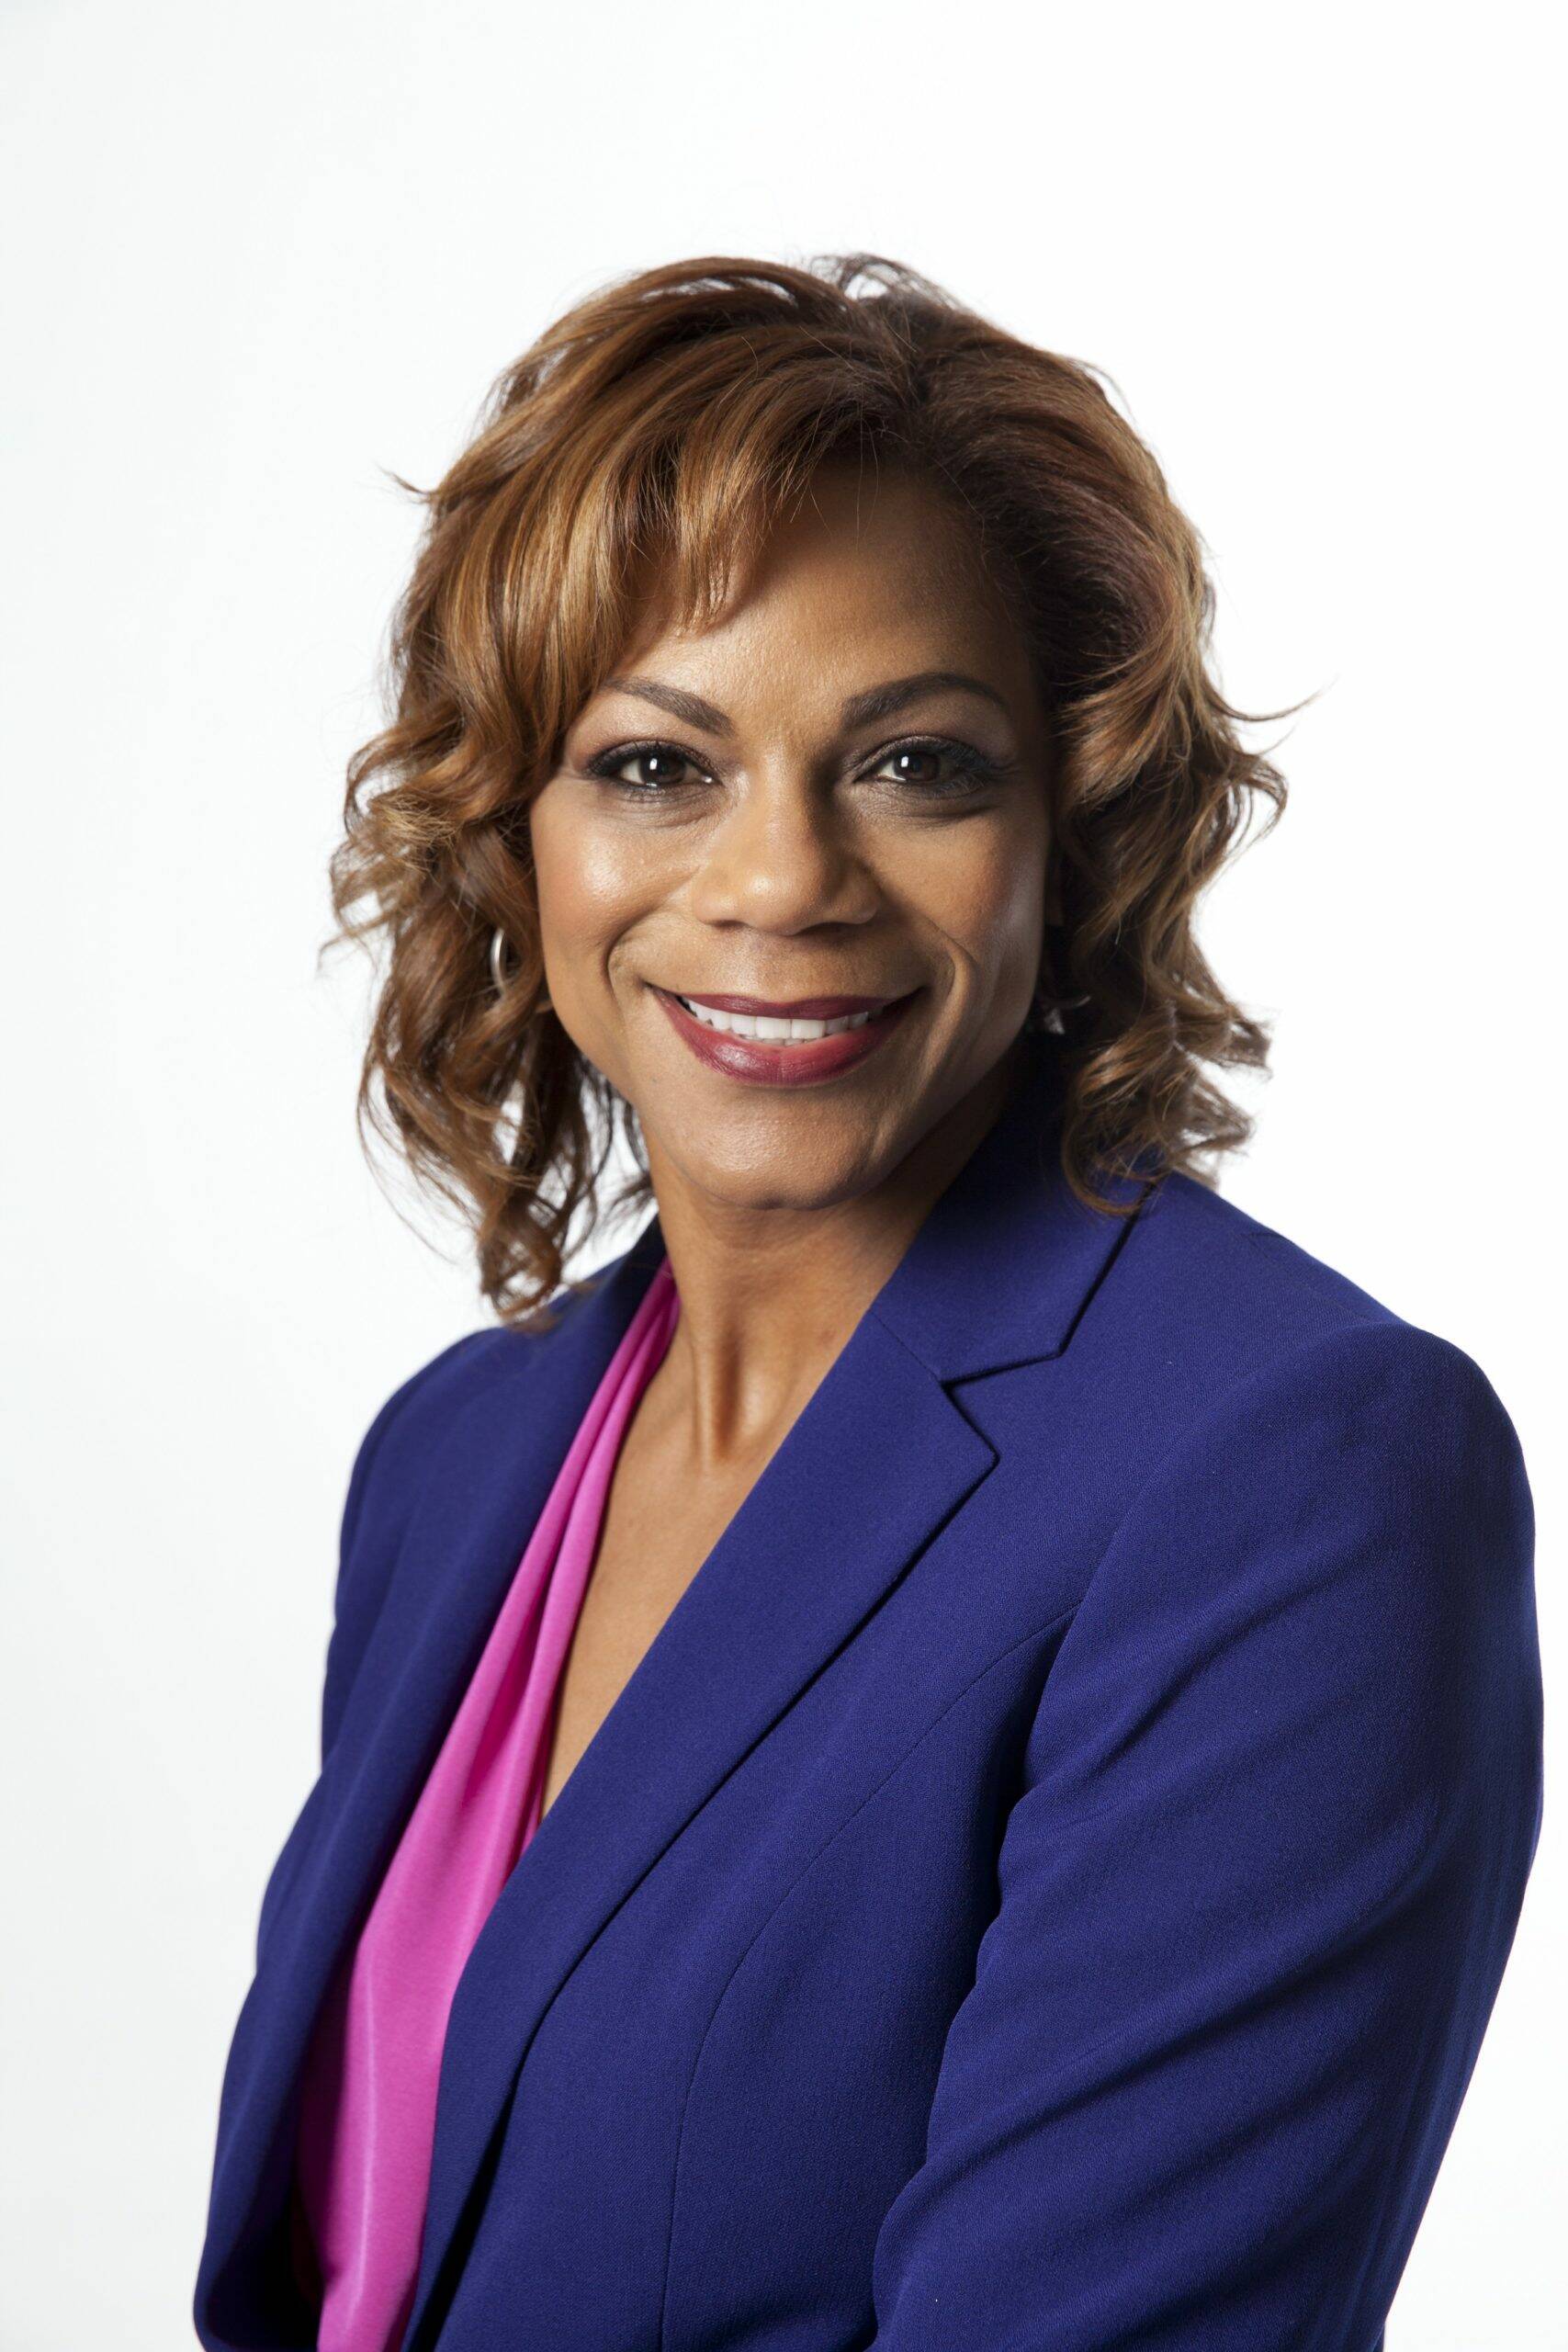 Karen Lee is a U.S. Army veteran and CEO of Plymouth Housing. (Photo courtesy of Plymouth Housing)